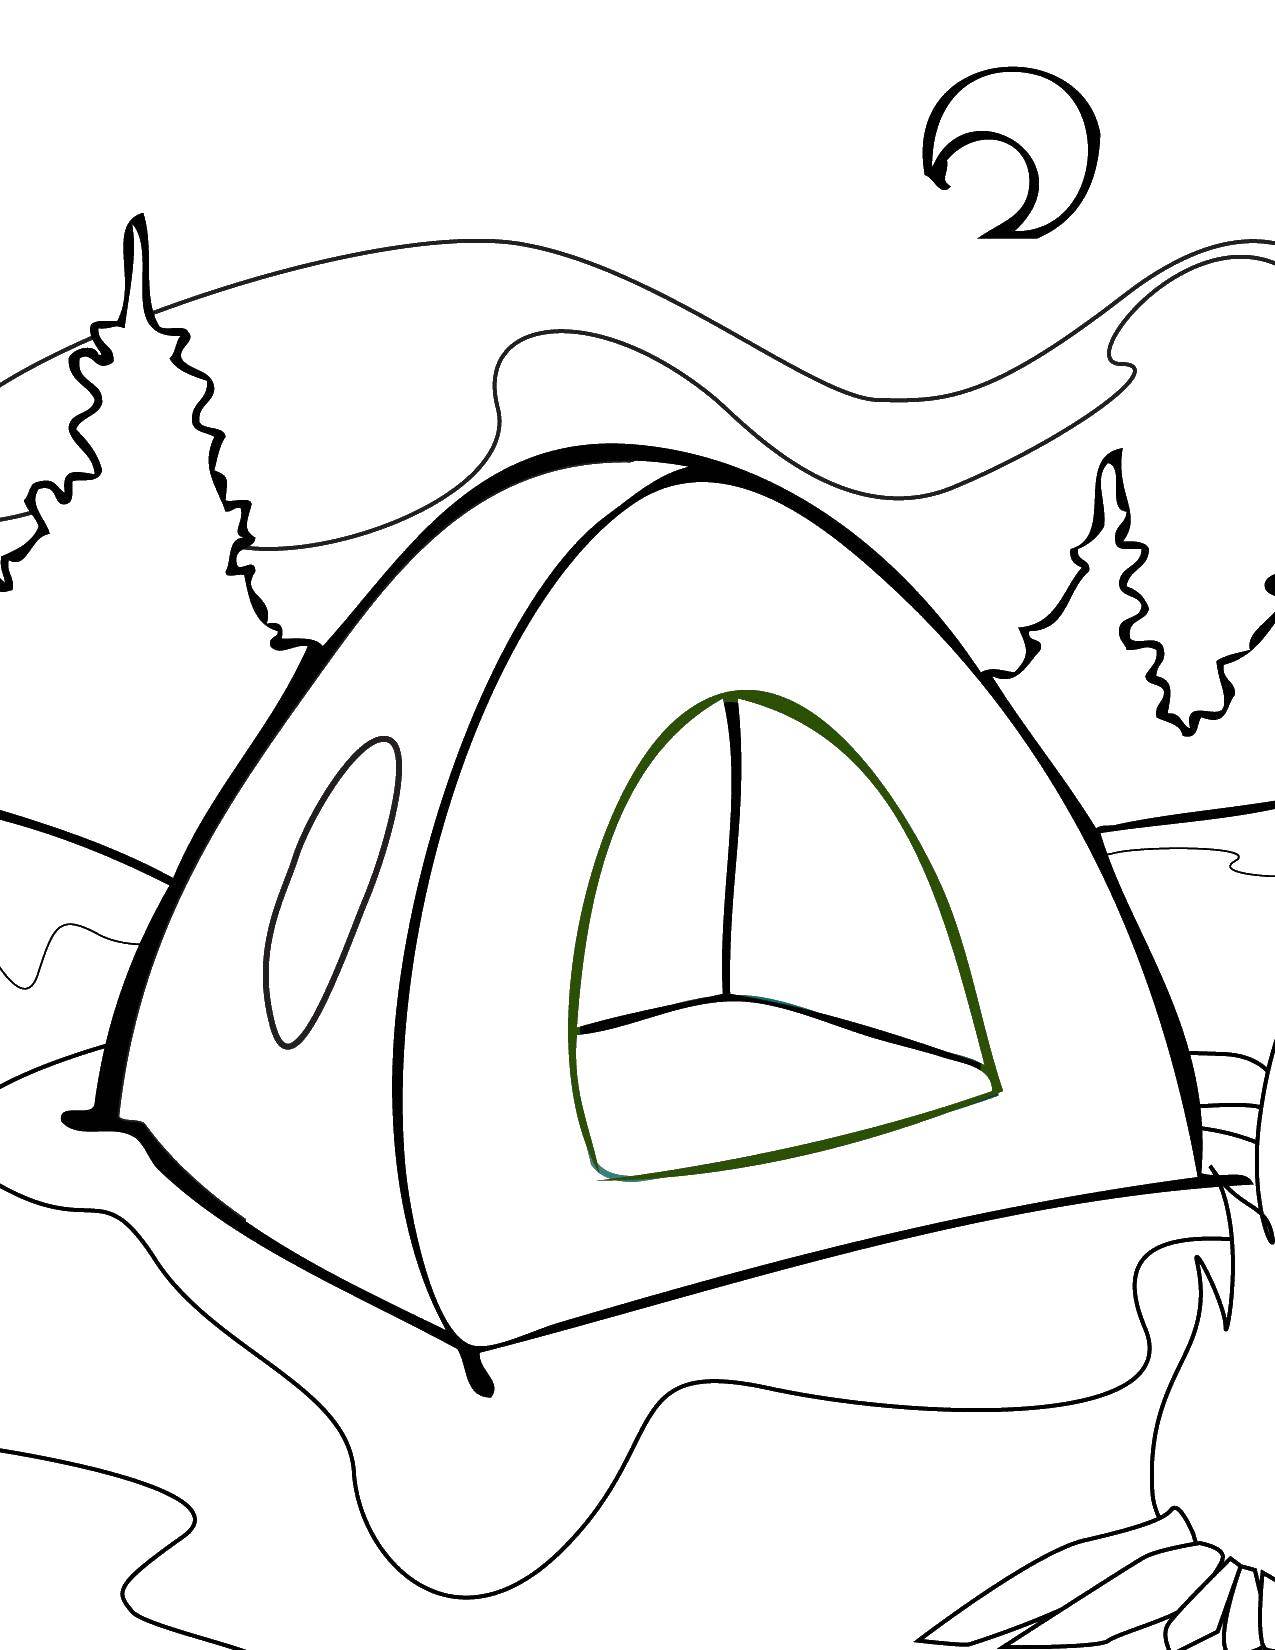 Coloring Tent in the woods. Category Camping. Tags:  tent, fire, pots.